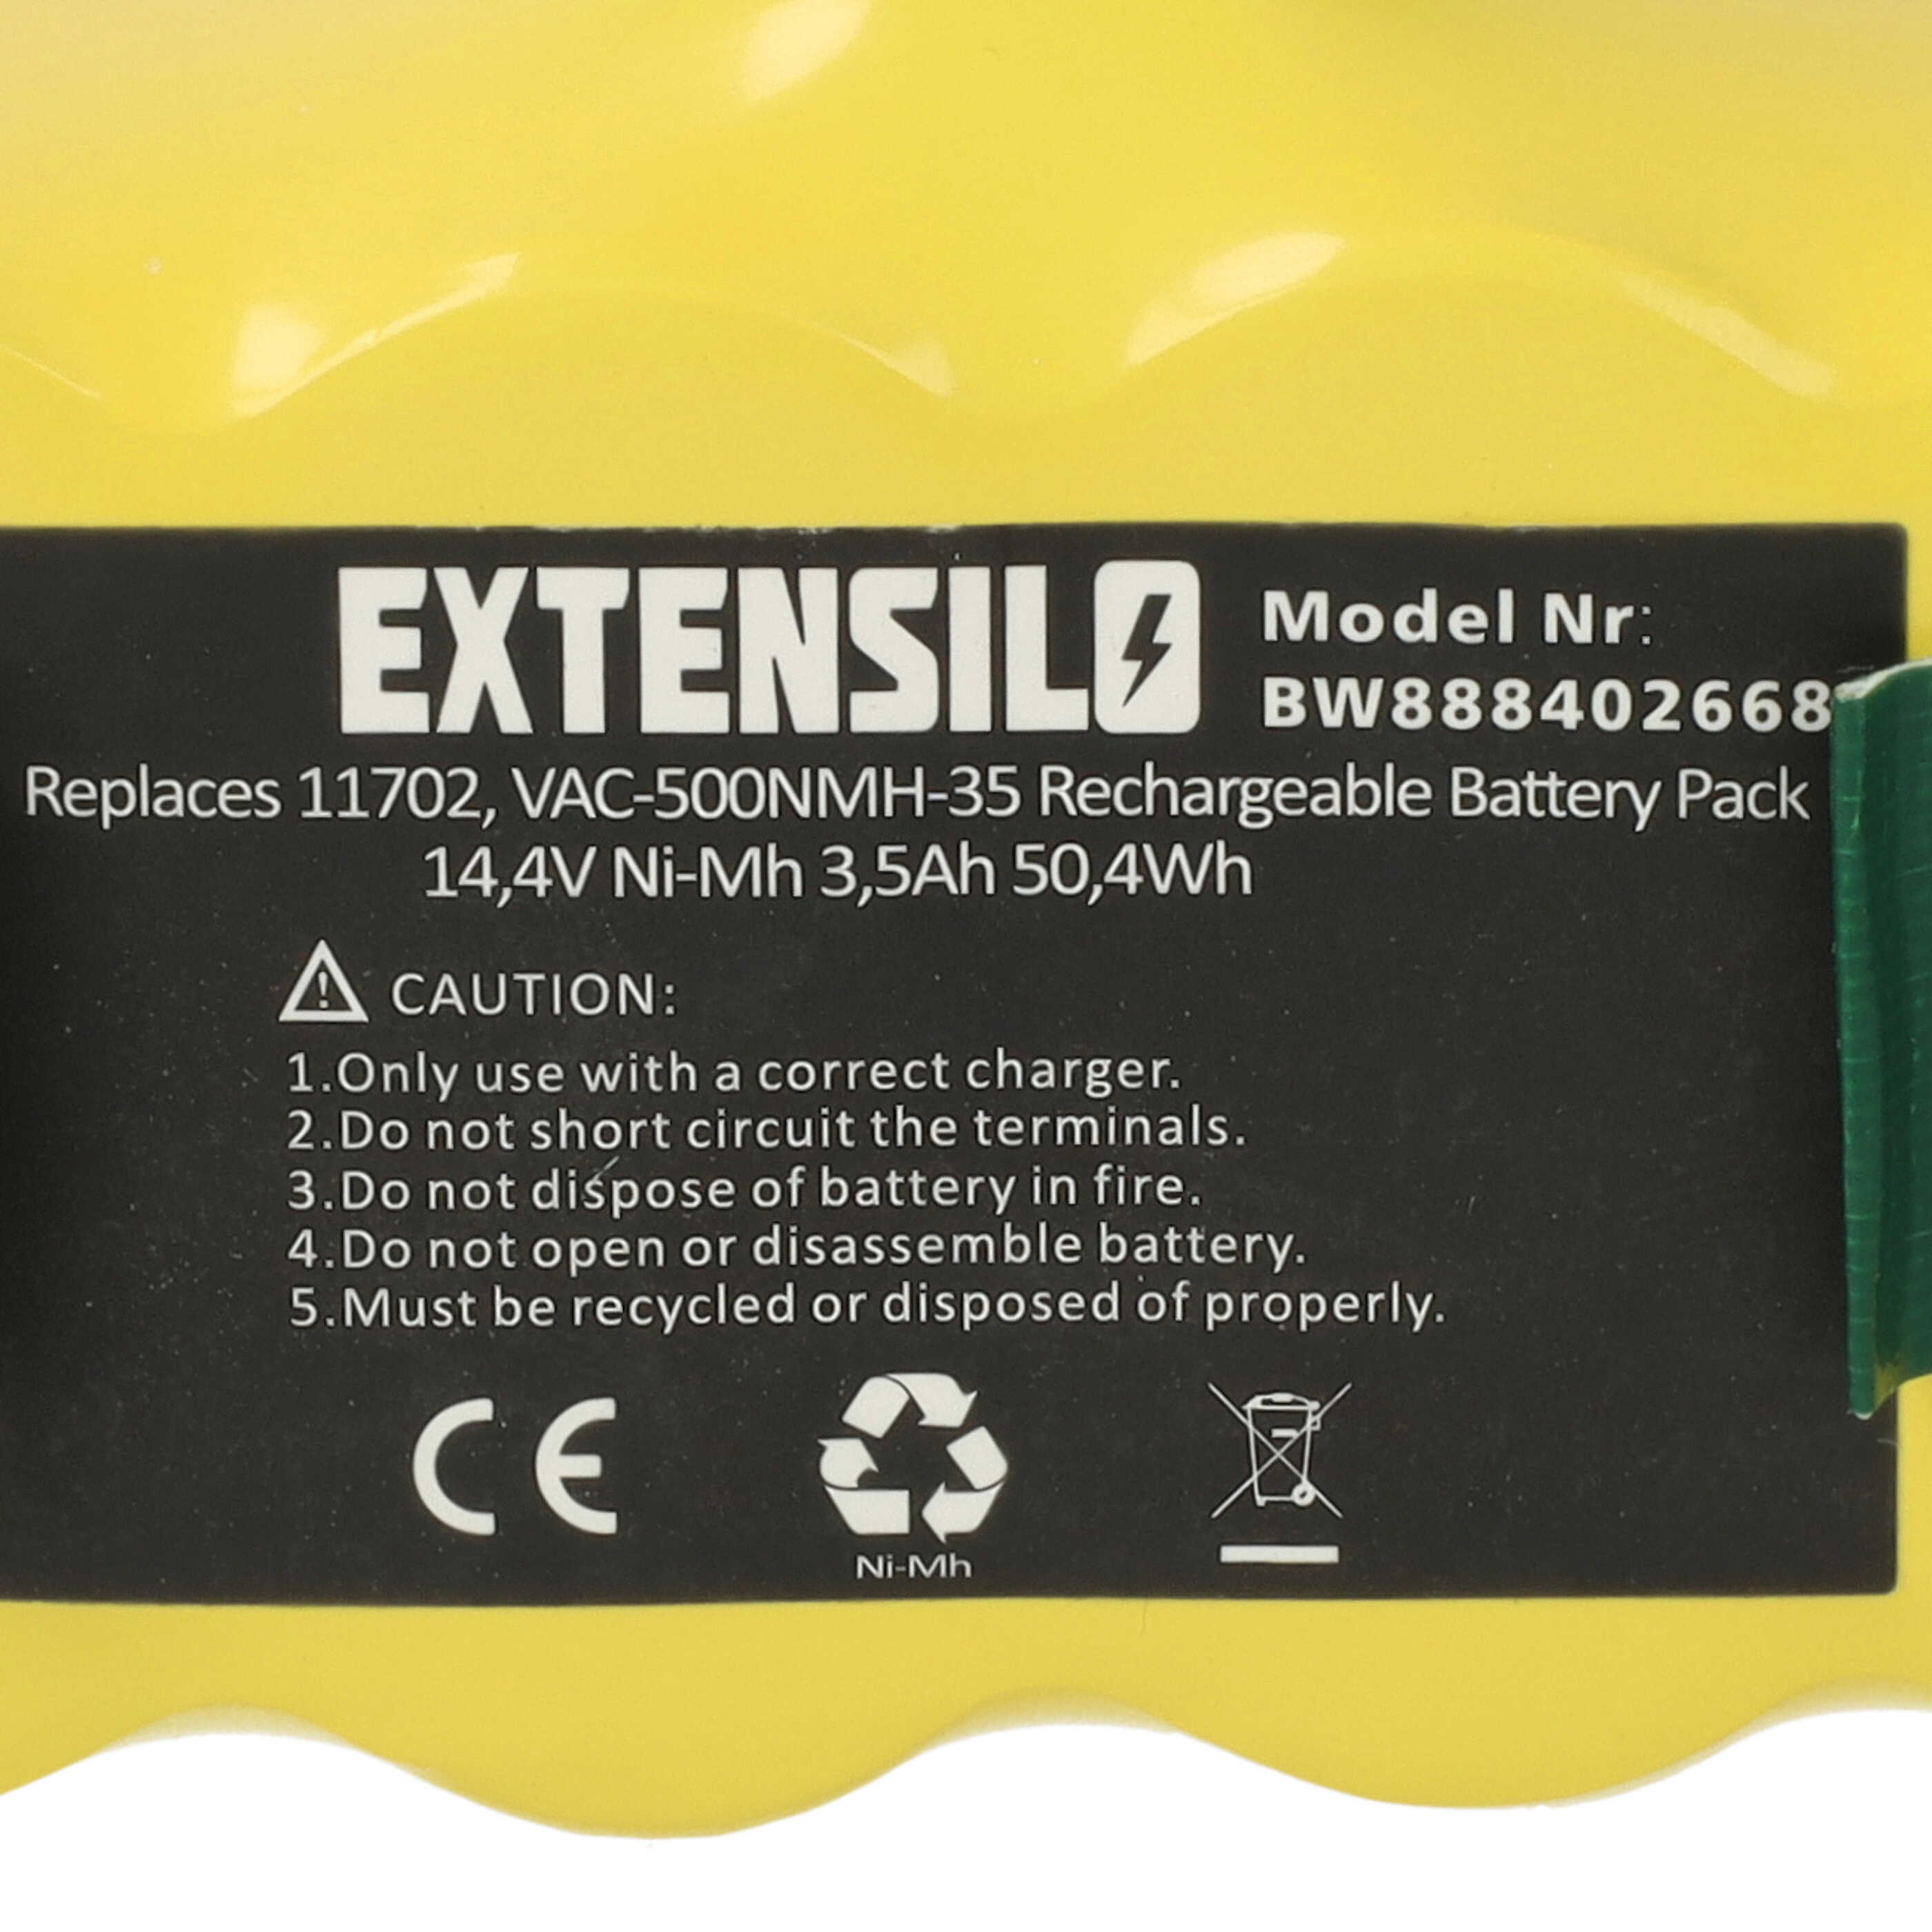 Battery Replacement for 80501e, 80601, 11702, 68939, 80501, 855714, 4419696 for - 3500mAh, 14.4V, NiMH